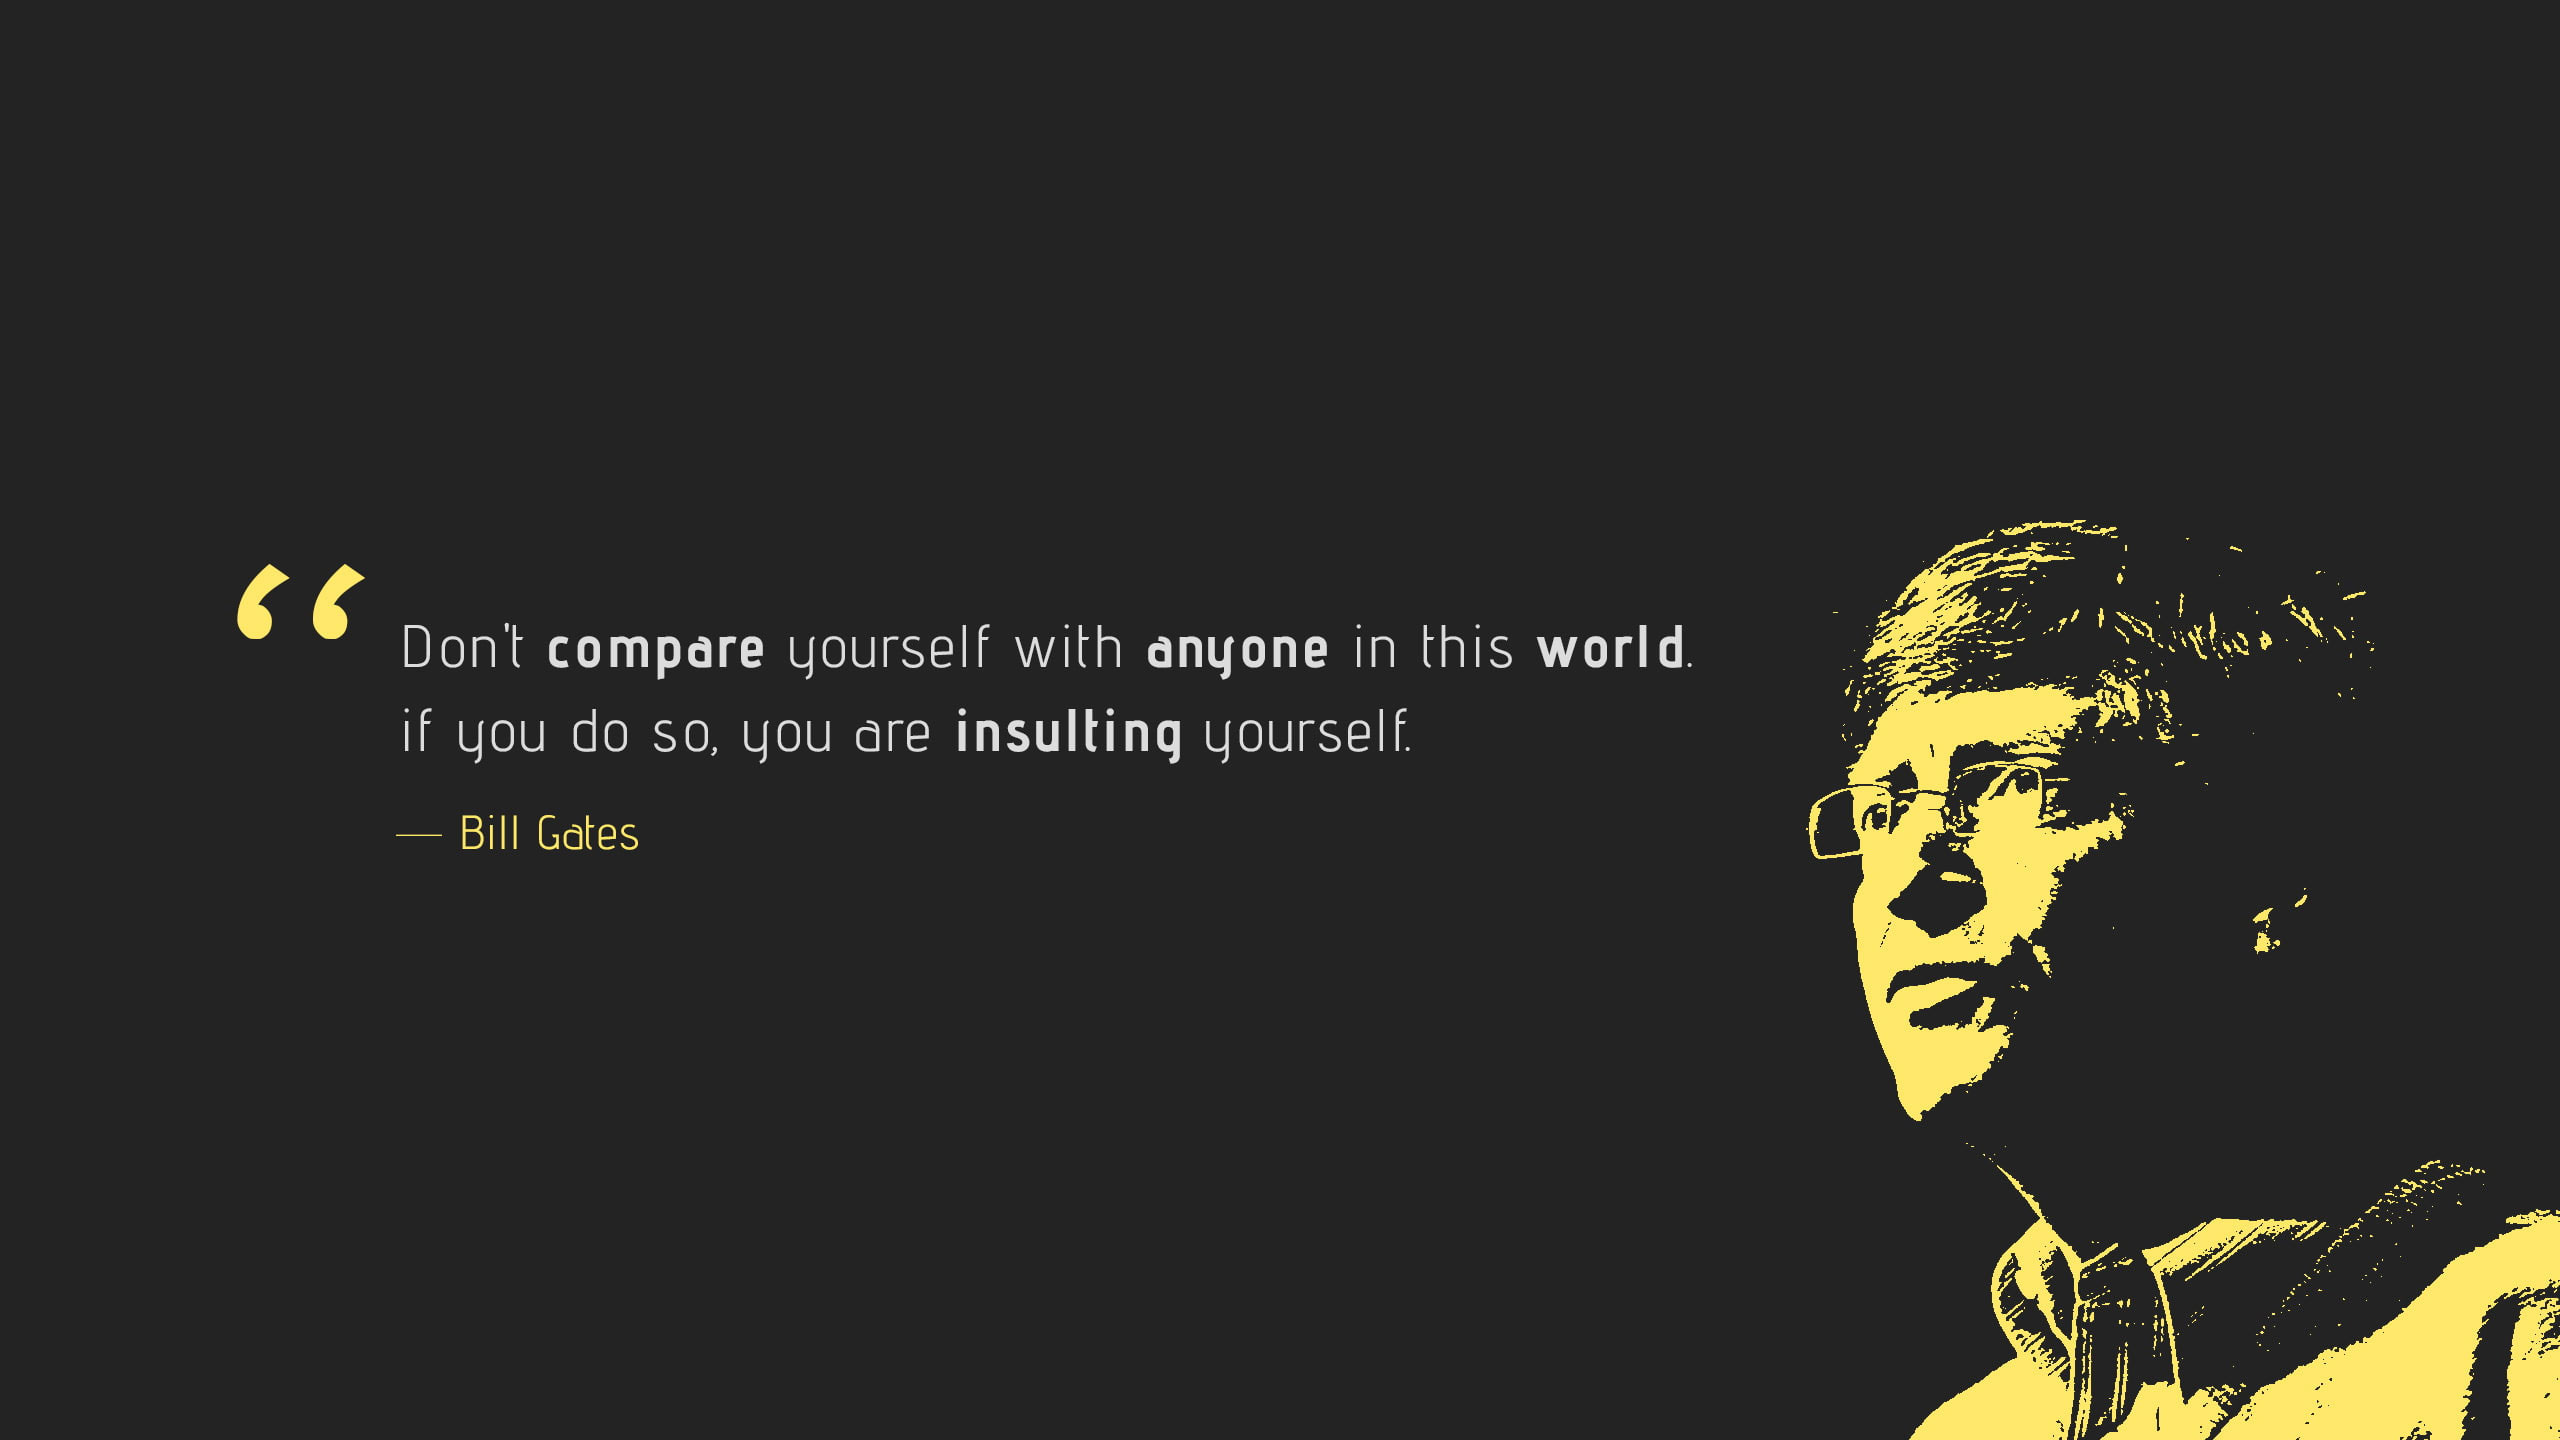 Wallpaper Dont Compare, Insulting Yourself, Popular Quotes